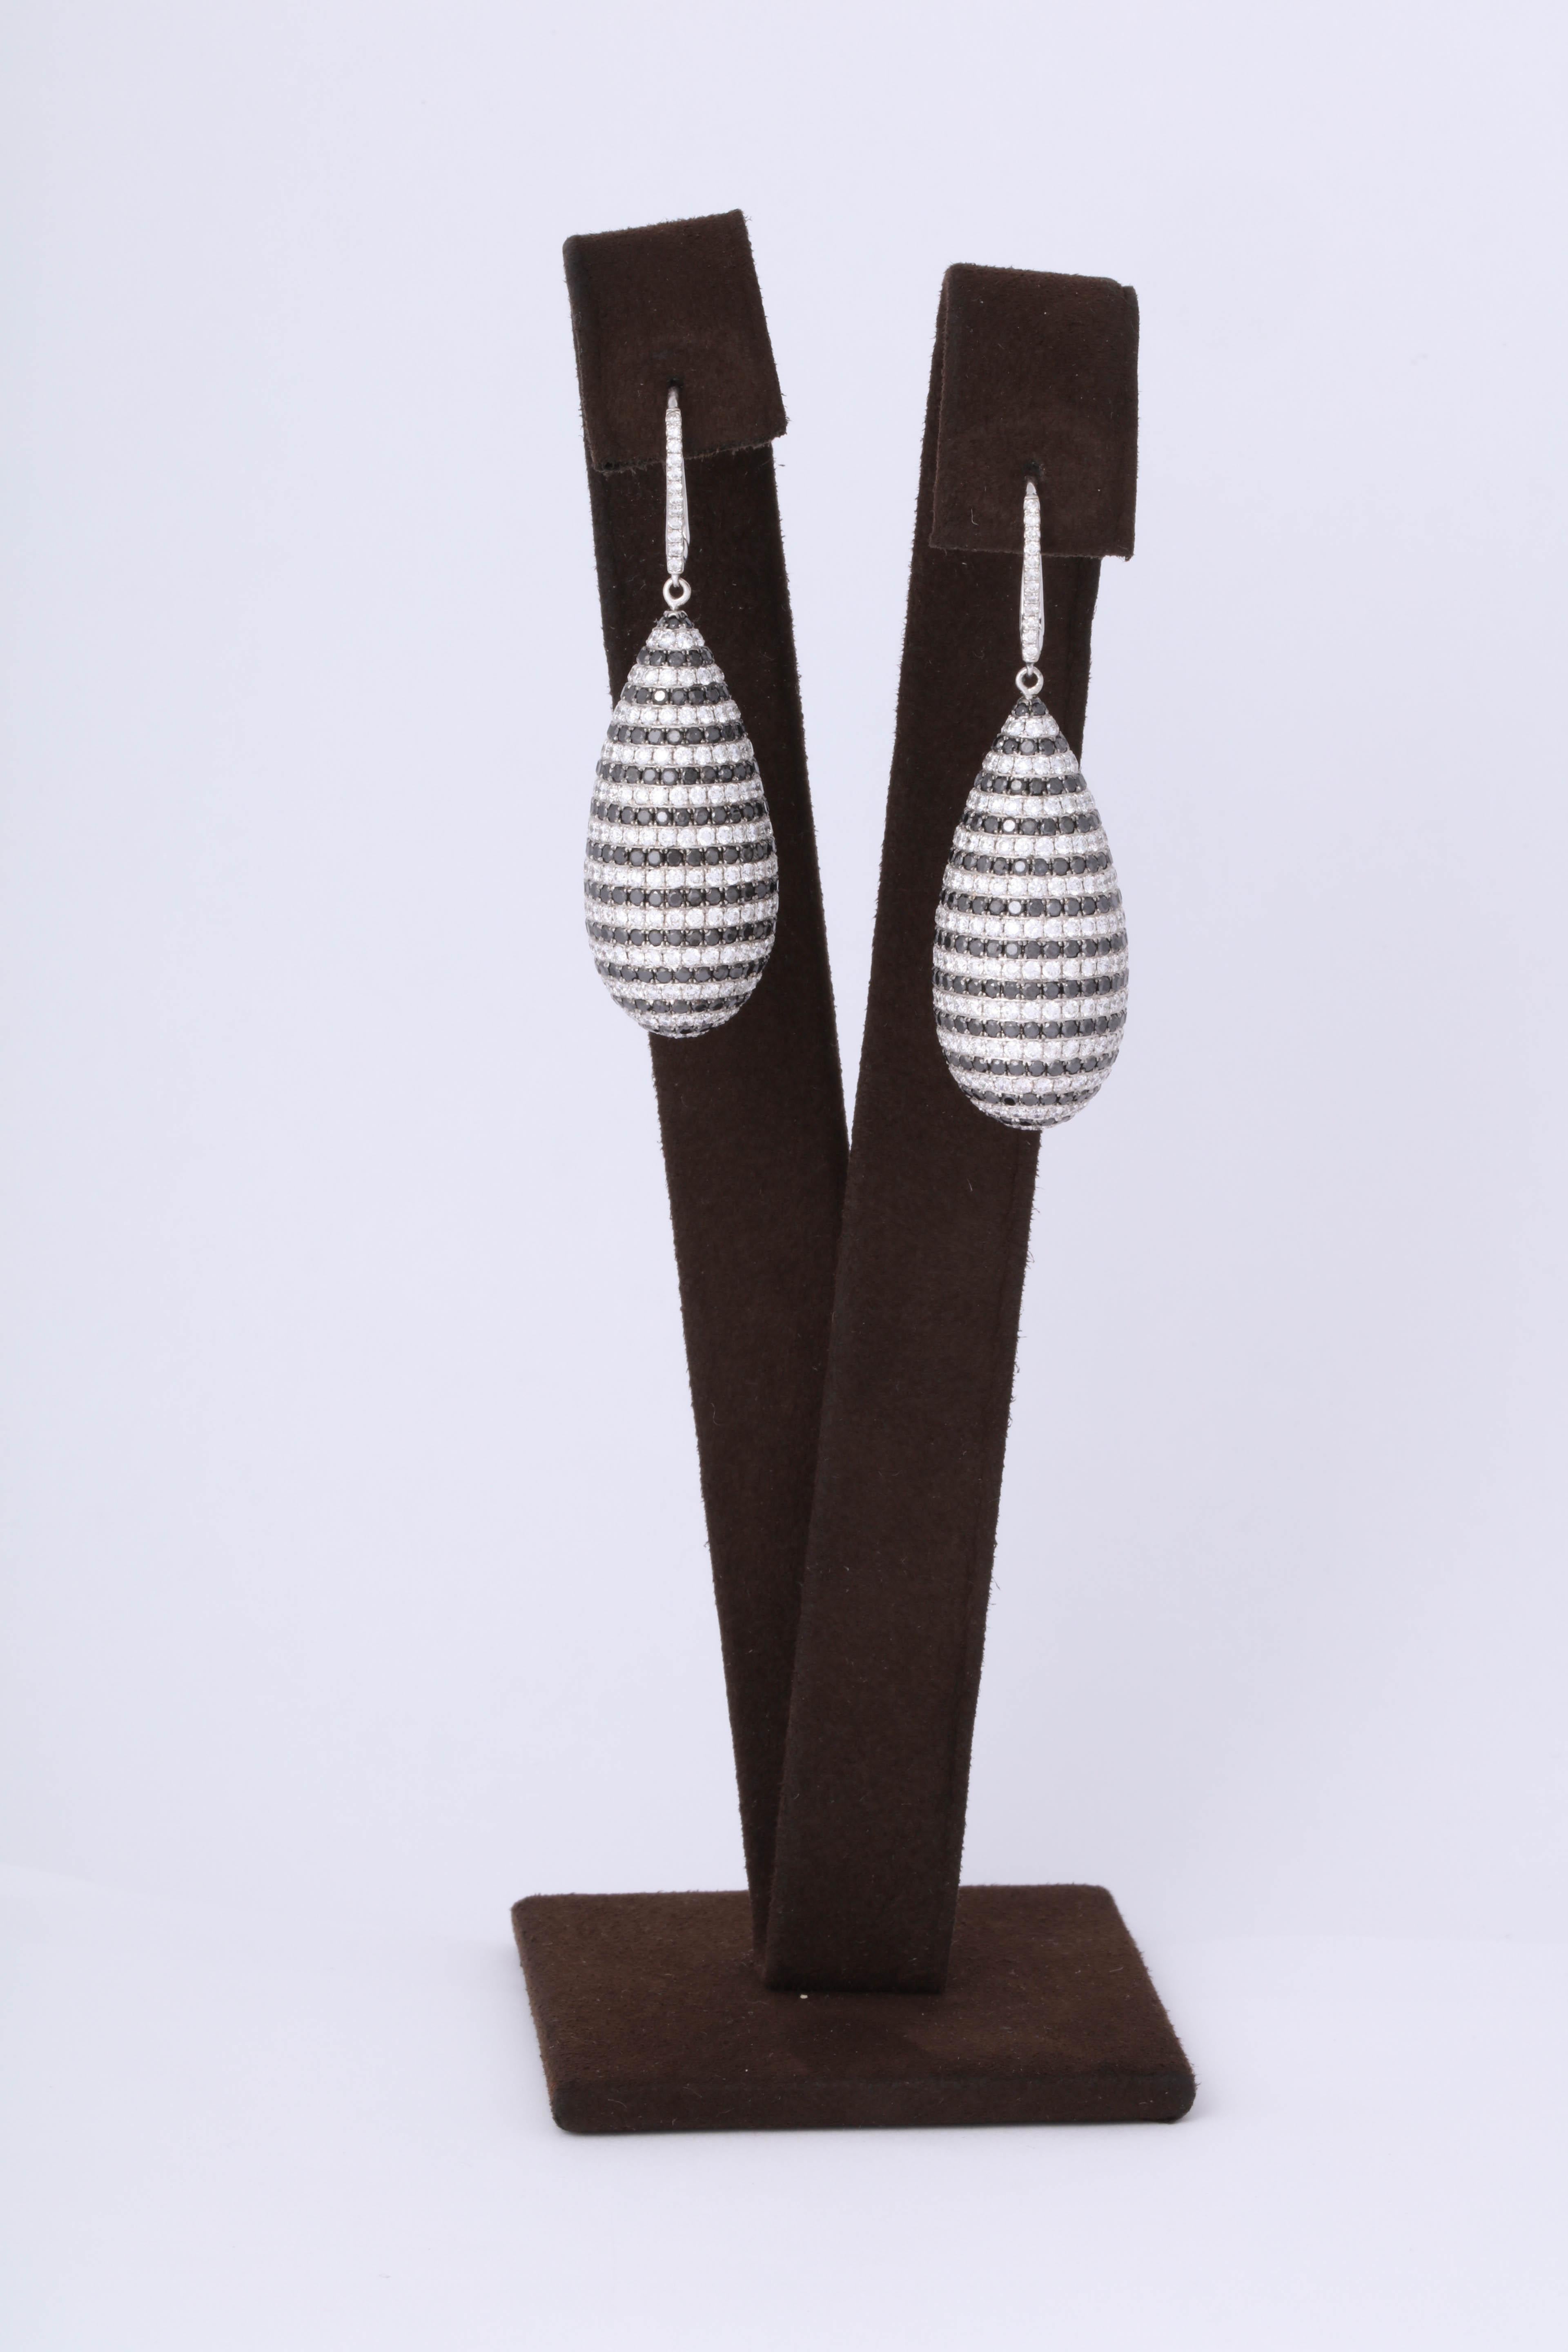 

A unique pair of fashionable diamond earrings.

13.54 carats of black and white diamonds set in 18k white gold. 

The earring is constructed in a dome shape and it is completely covered in black and white diamond sparkle!!

Slightly over two